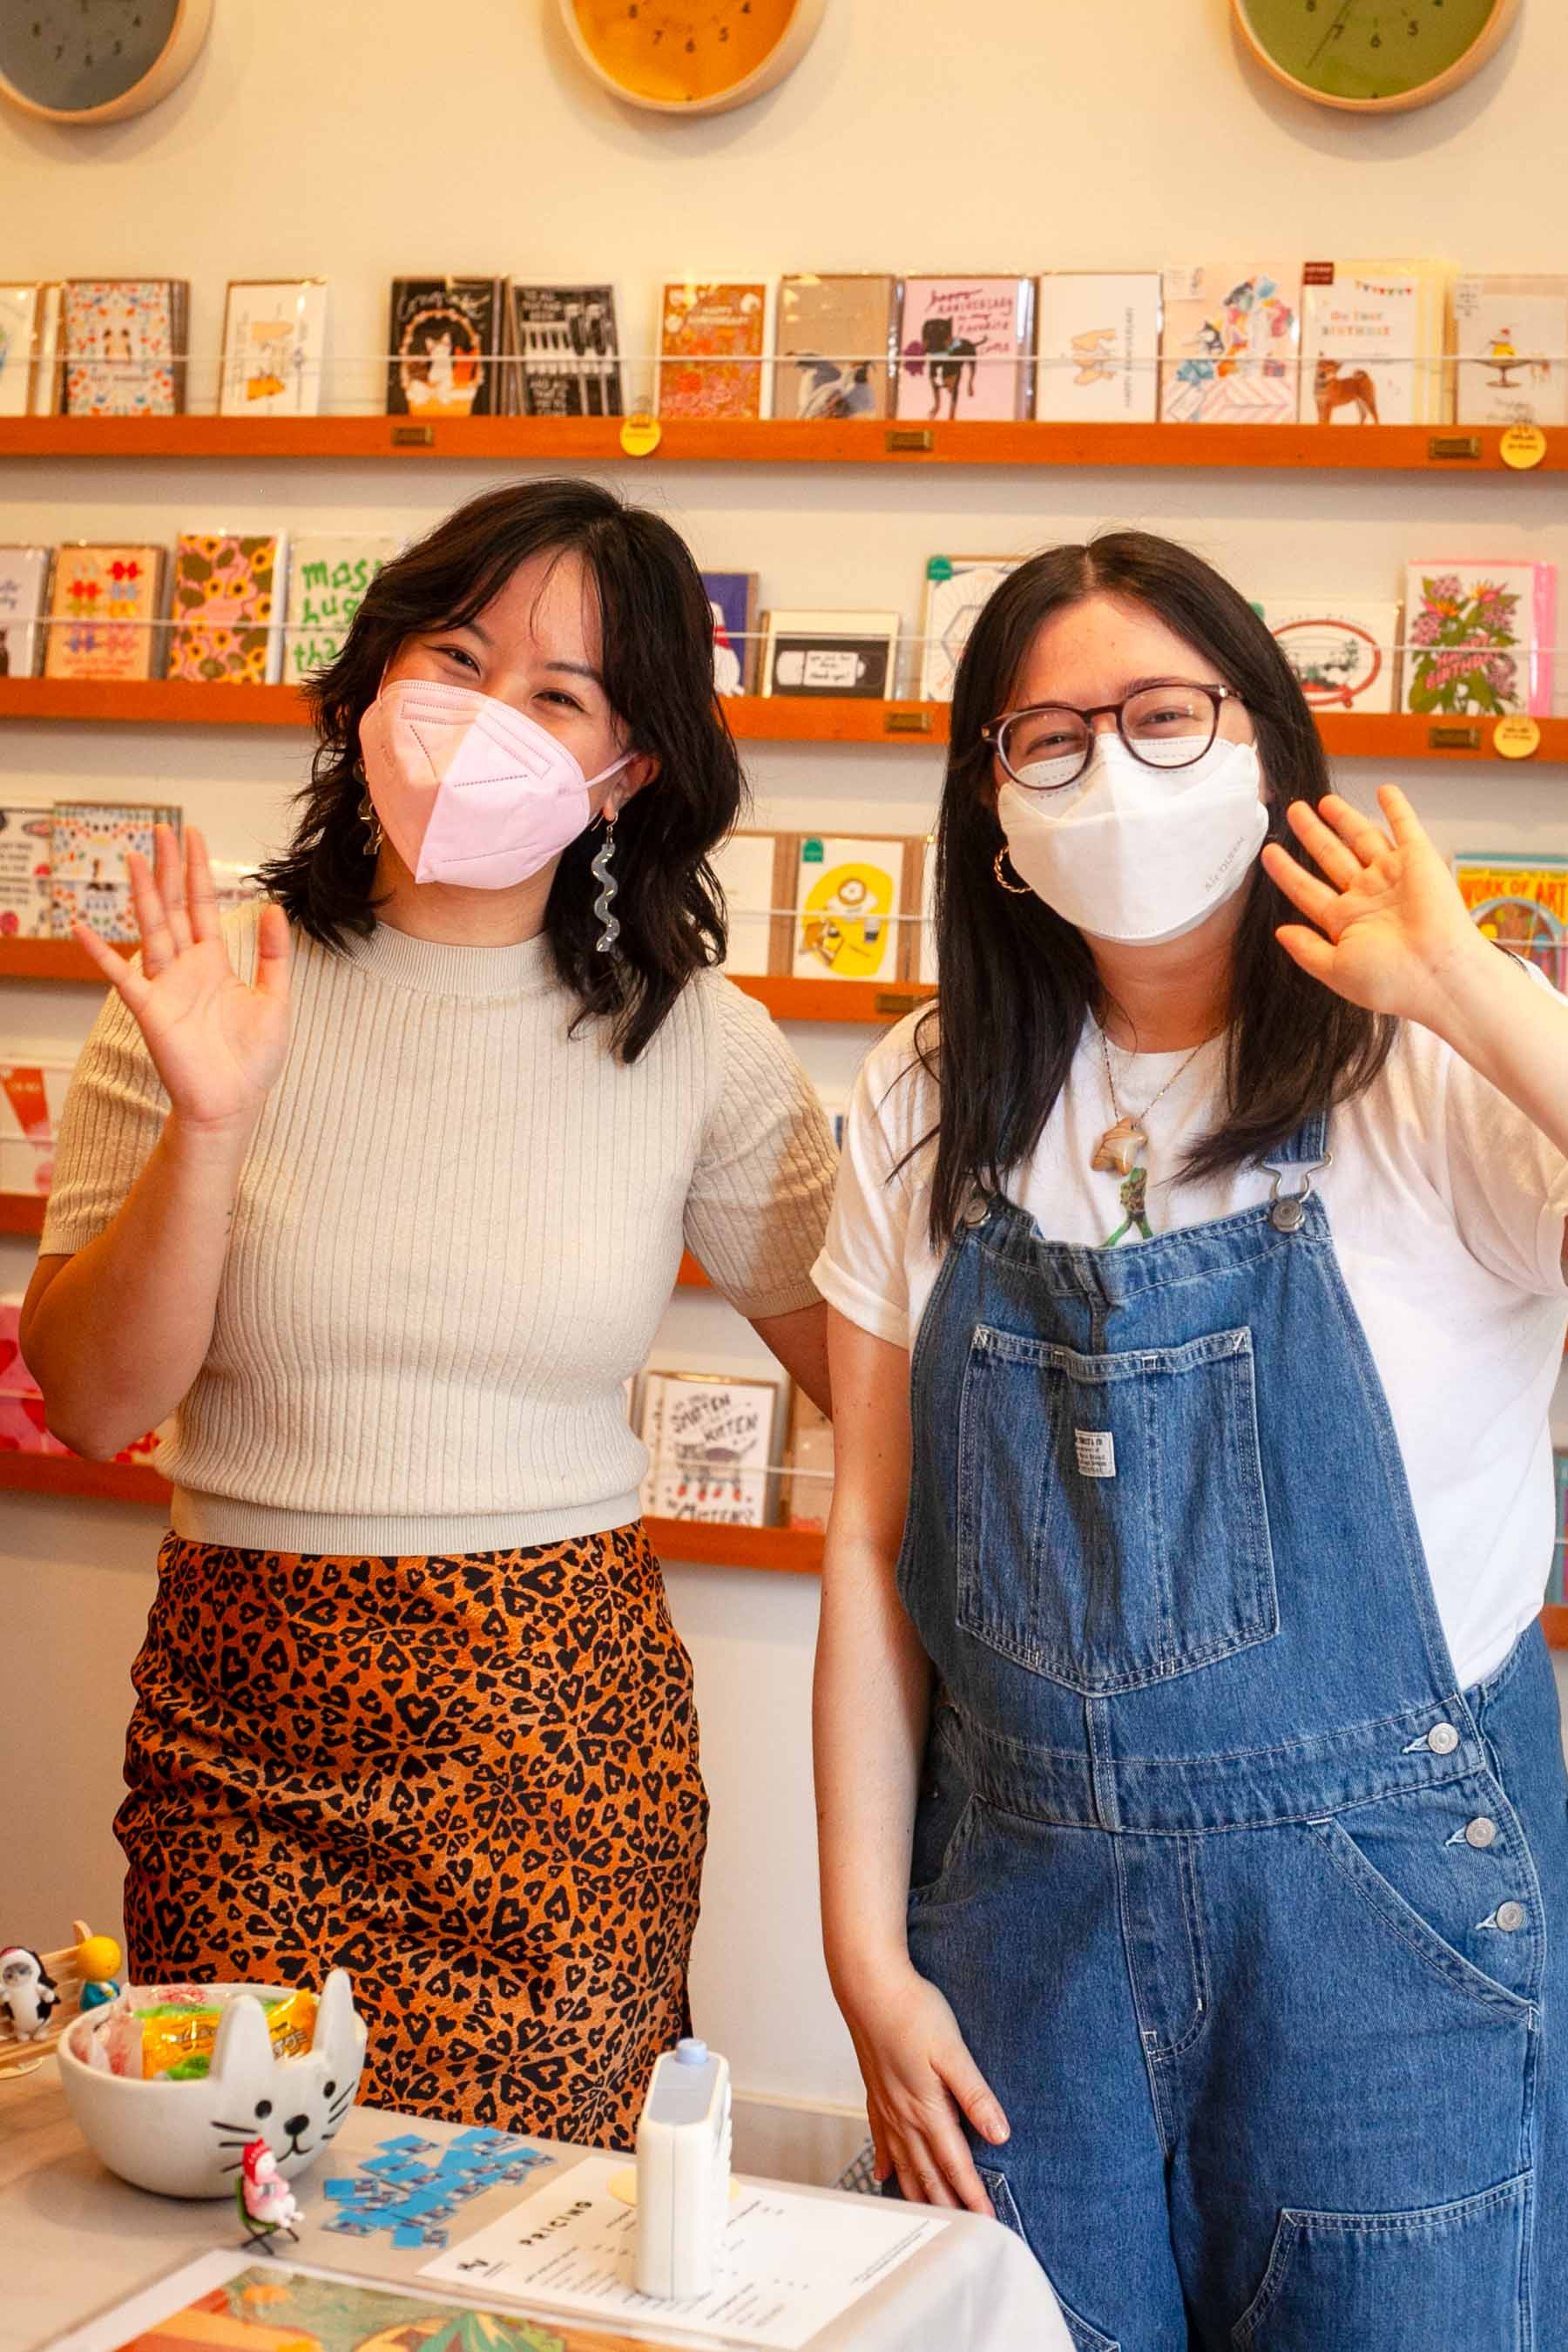 Happy First Friday! Hannah and Liz K, wearing masks, wave hello to our store photog.